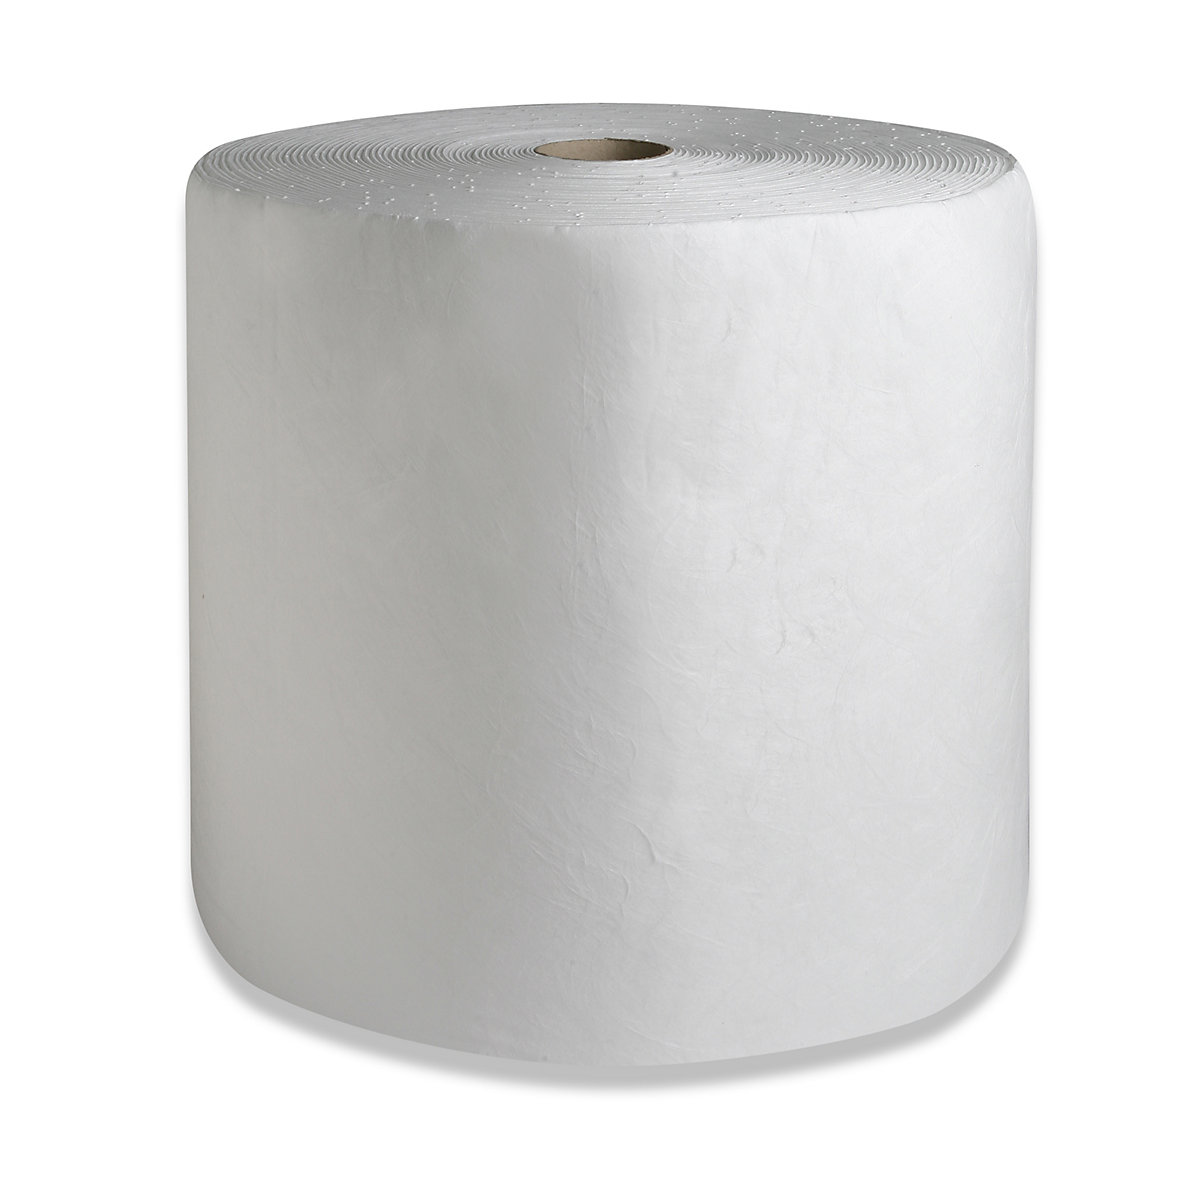 FIRST absorbent sheeting, roll of sheeting, medium version, for oil, 400 mm x 60 m, white, pack of 2 rolls-15